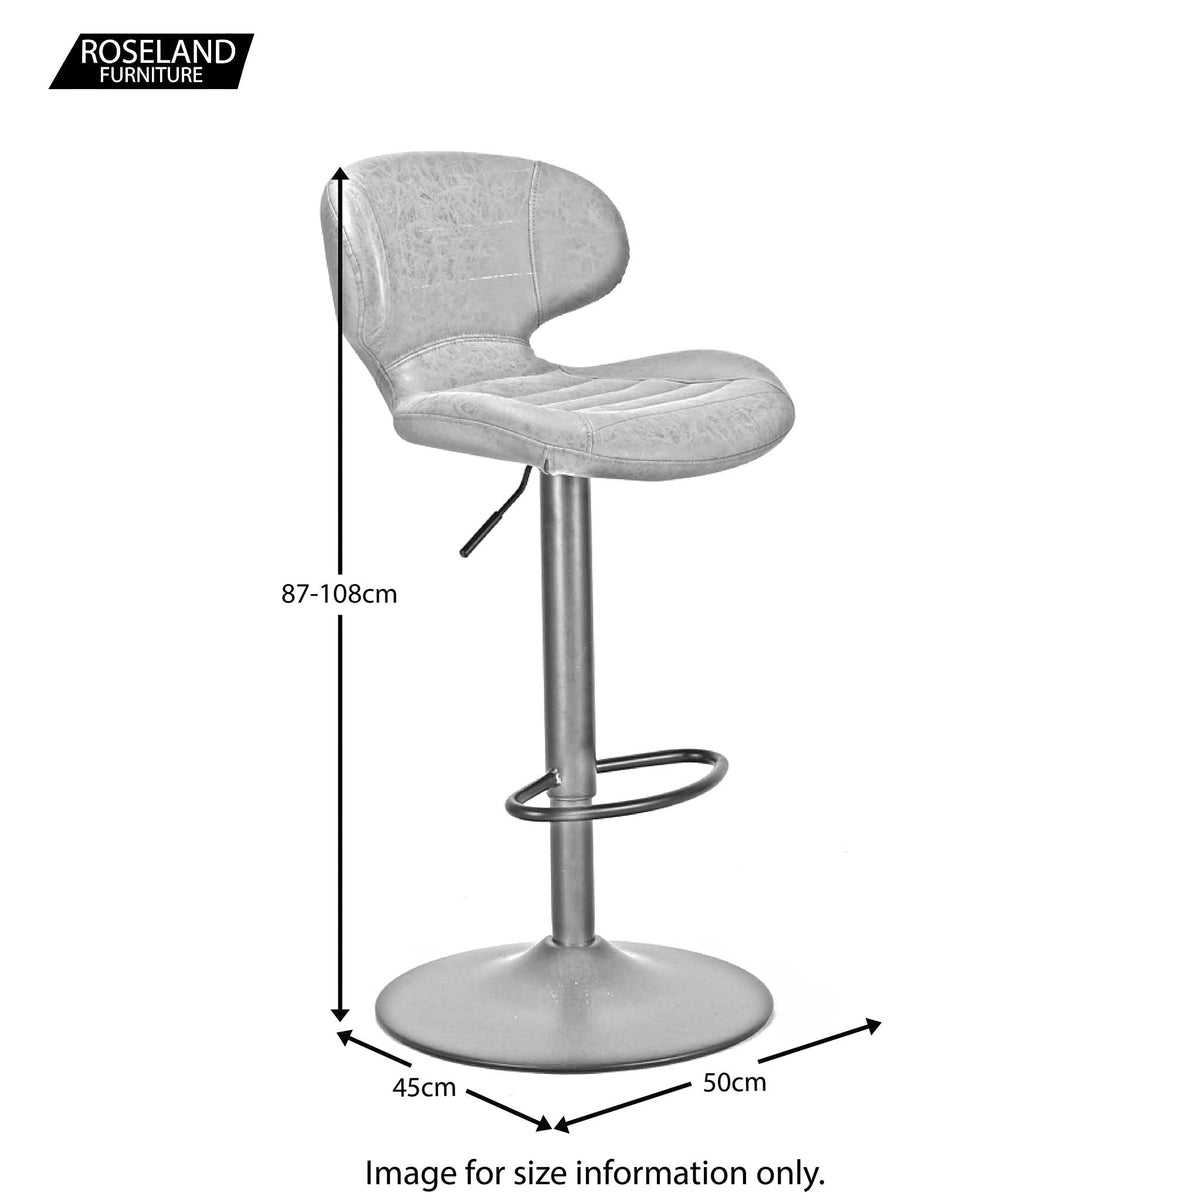 Mendez Faux Leather Bar Stool - Size Guide